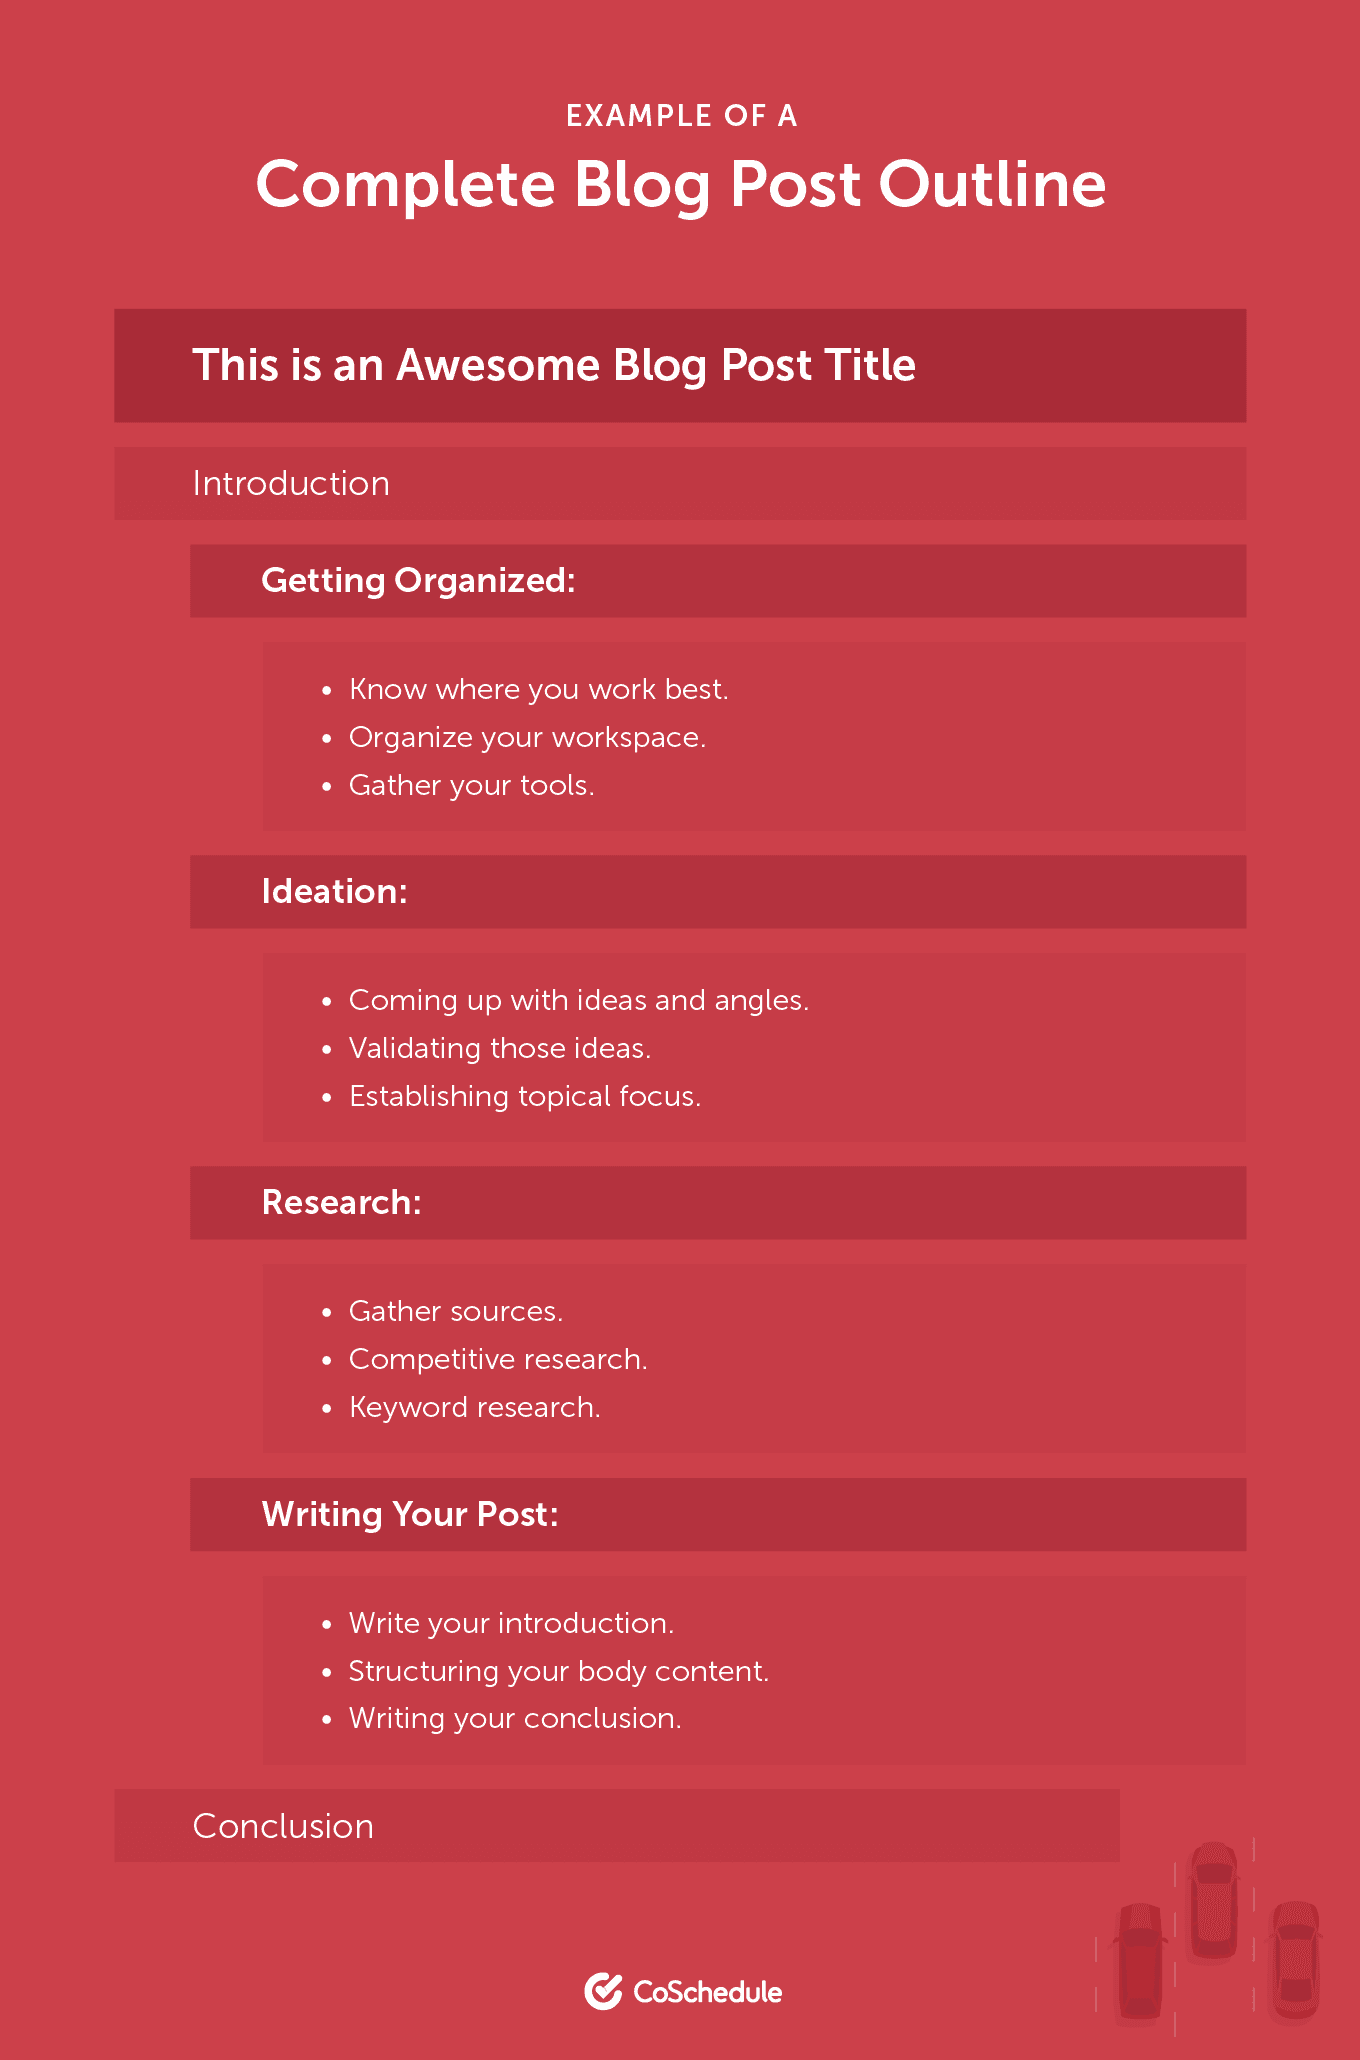 Example of a Complete Blog Post Outline